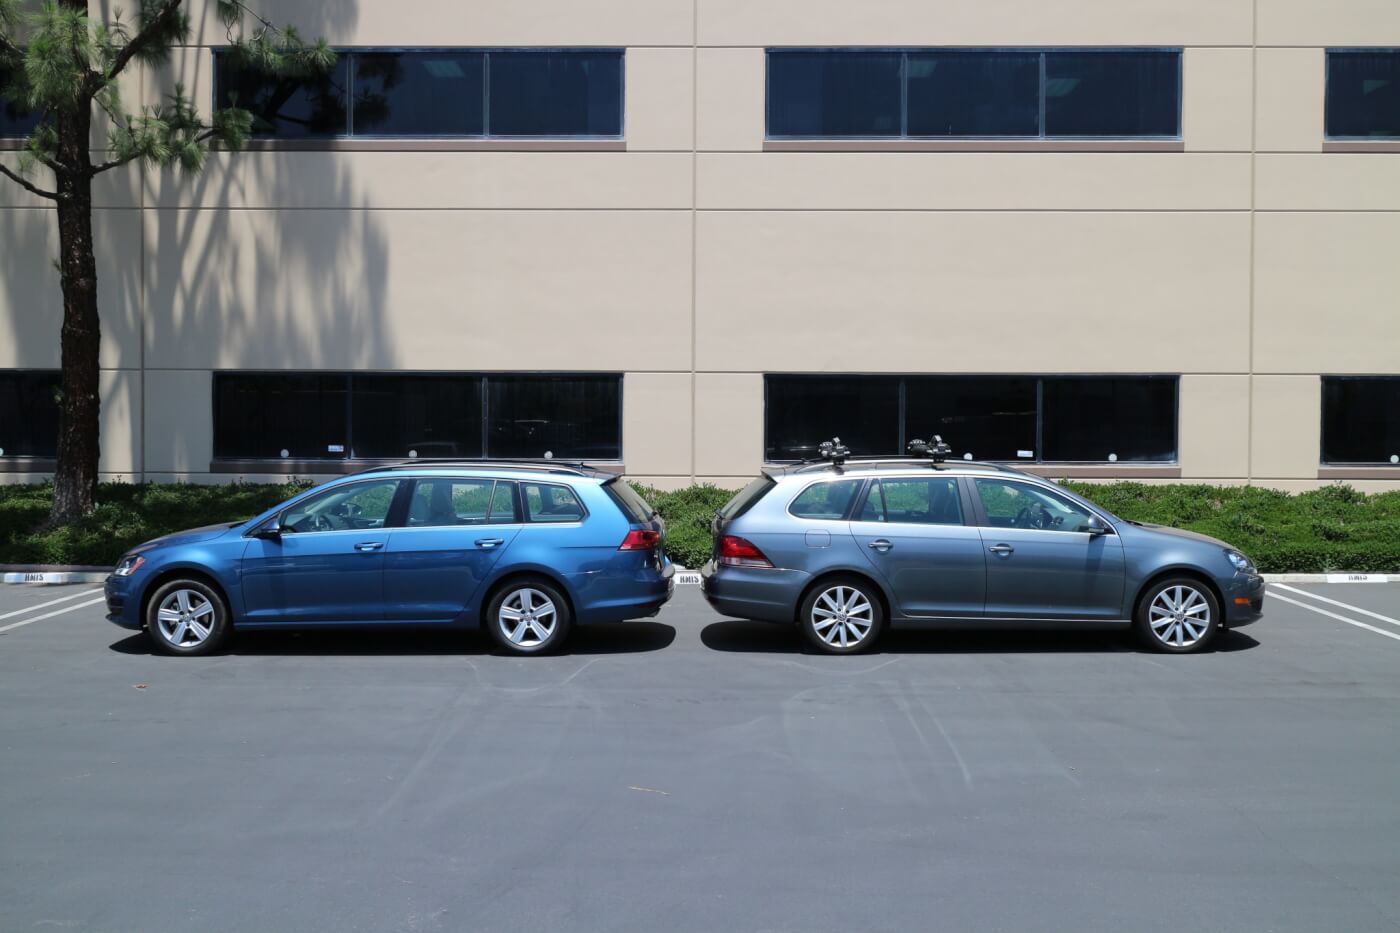 Here you see a comparison between the older style Jetta Sportwagen (right) and the new 2015 Golf SportWagen (left). Believe it or not, the 2015 Golf SportWagen is similar in size, on the outside, as its older brother: the Jetta Sportwagen. It does have a two-inch longer wheelbase, but the bodies are virtually the same length, width and height.